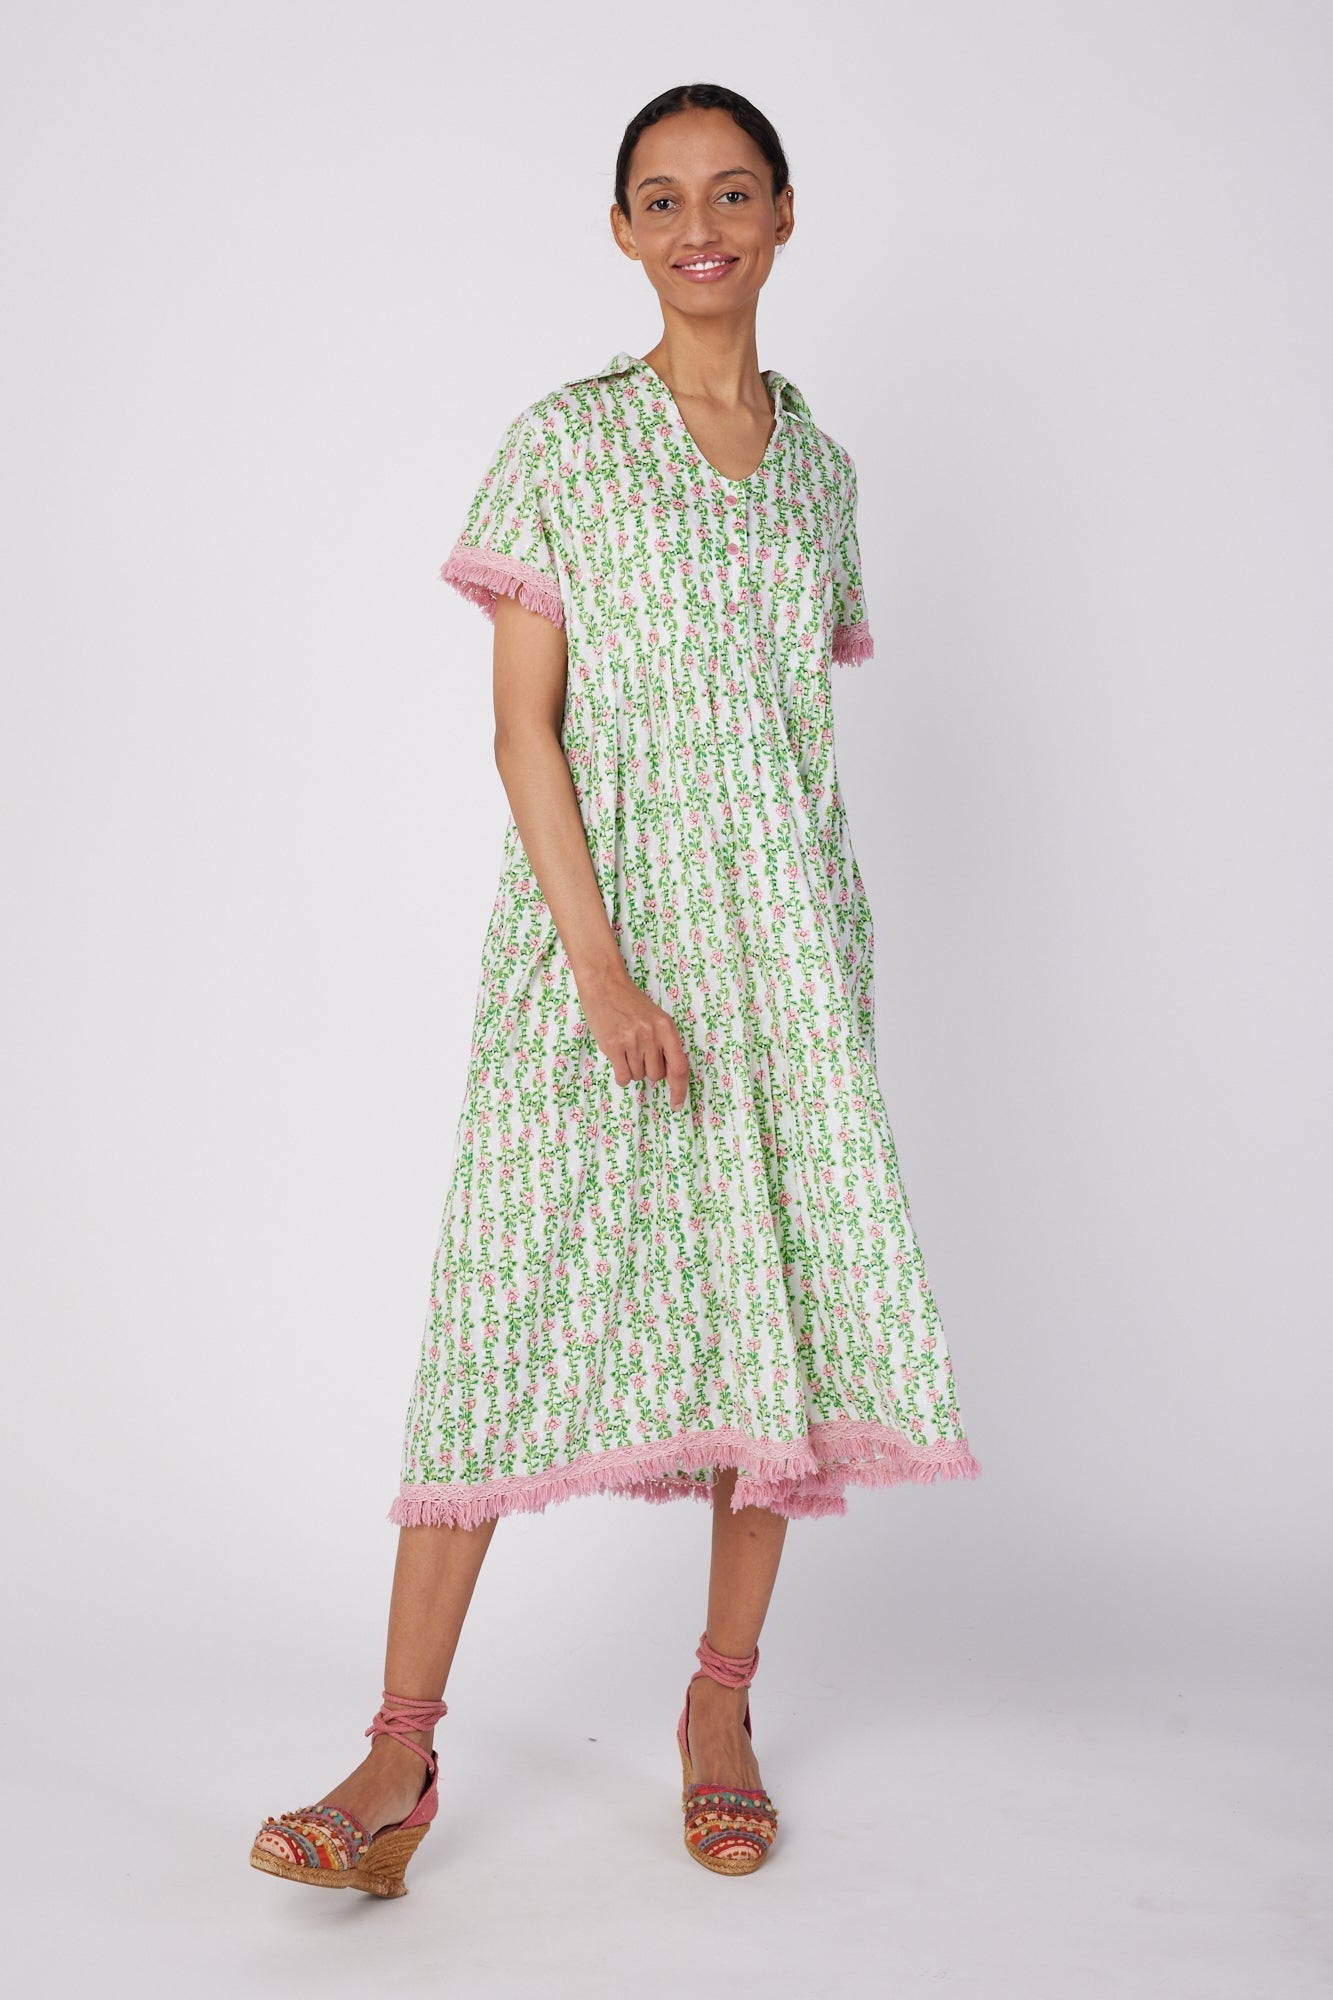 ModaPosa Cadenza Short Sleeve Midi Dress with Collar and Fringe Trim in Spring Garden . Discover women's resort dresses and lifestyle clothing inspired by the Mediterranean. Free worldwide shipping available!